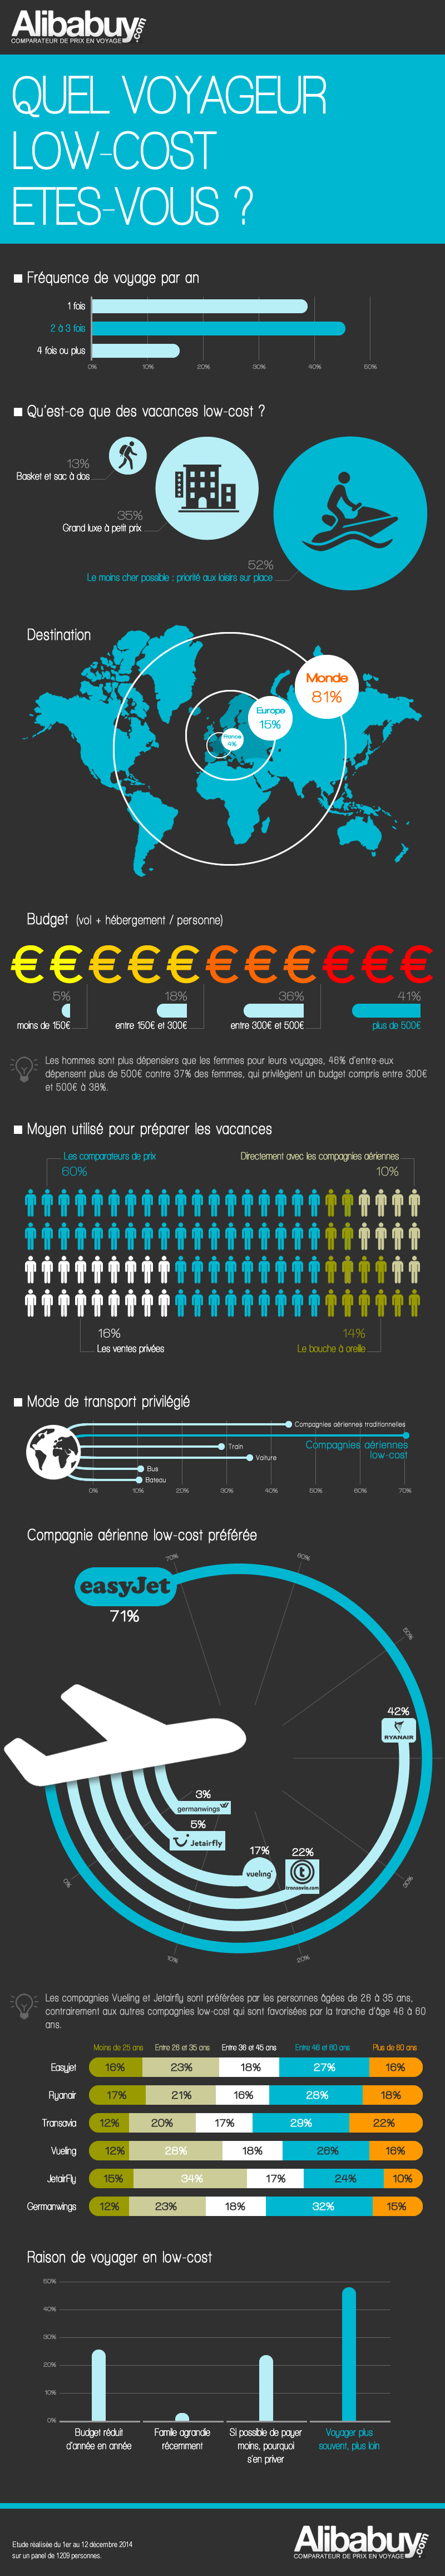 Infographie voyage low cost